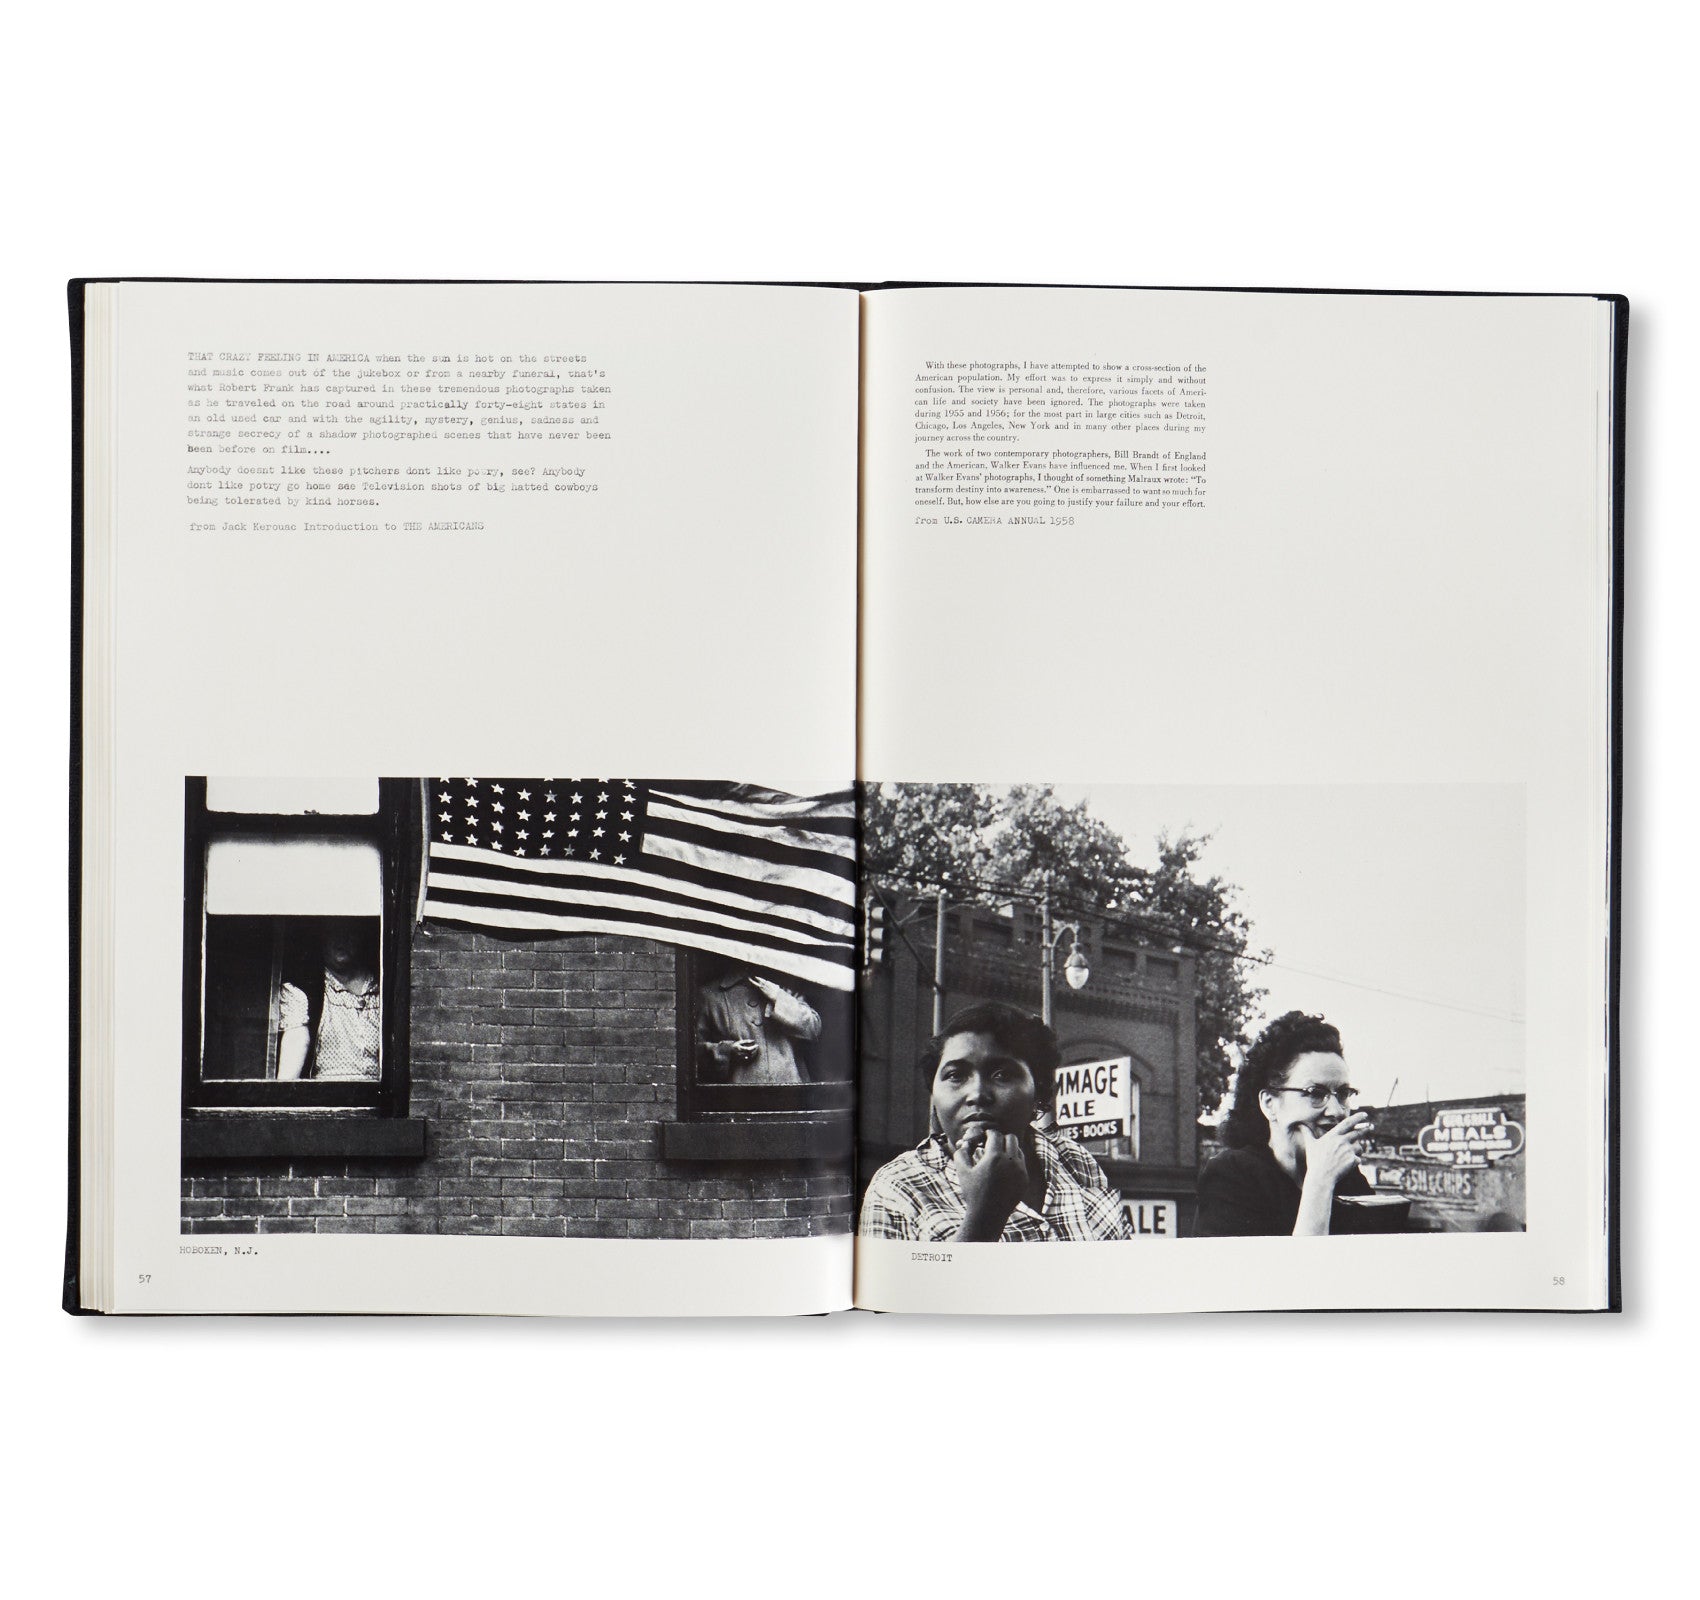 THE LINES OF MY HAND by Robert Frank